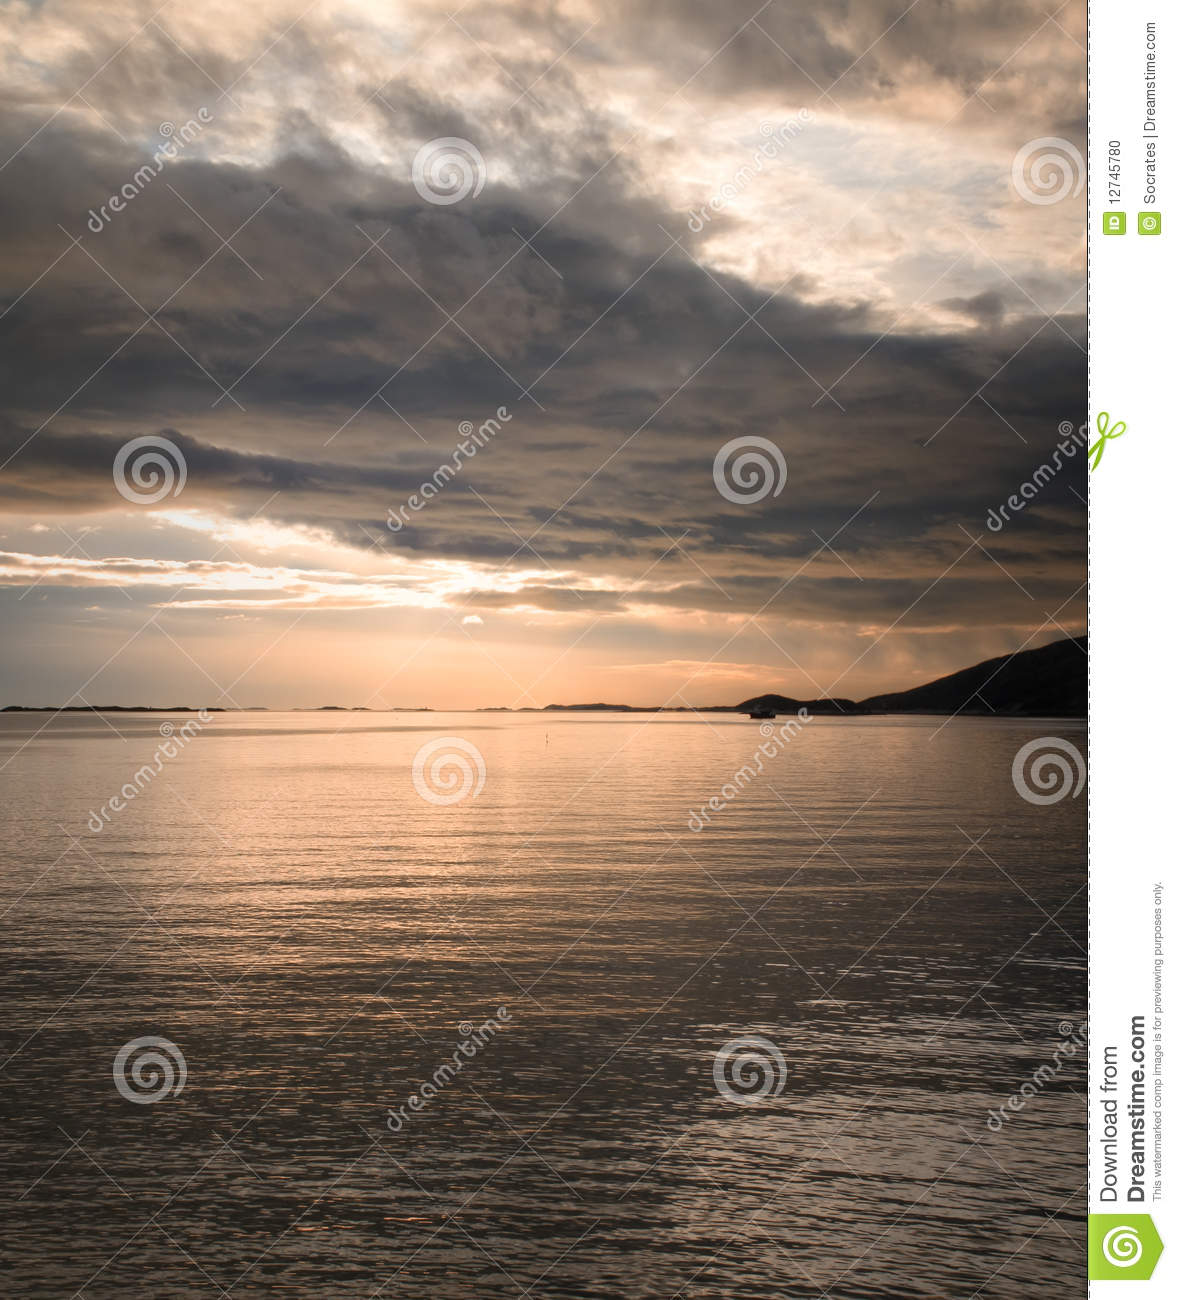 More Similar Stock Images Of   Midnight Sun In Norway  